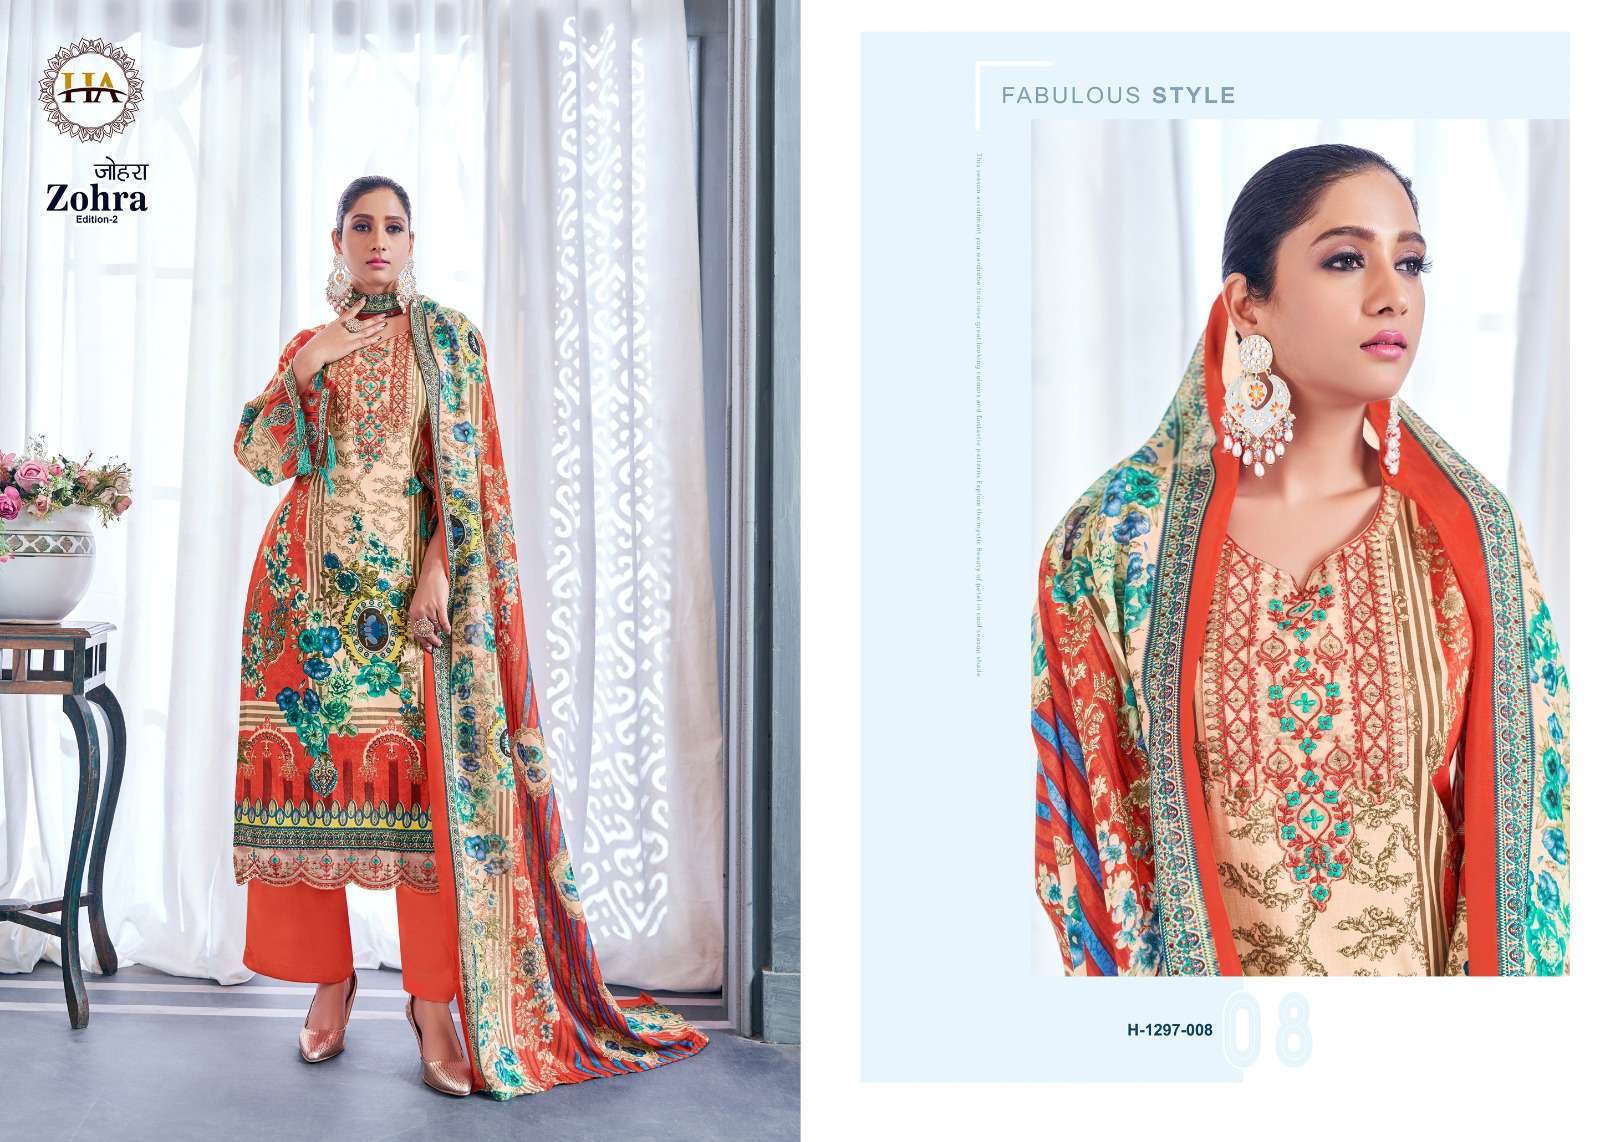 Zohra Vol-2 By Harshit Fashion Hub 1297-001 To 1297-008 Series Beautiful Suits Colorful Stylish Fancy Casual Wear Pure Cambric Print With Work Dresses At Wholesale Price